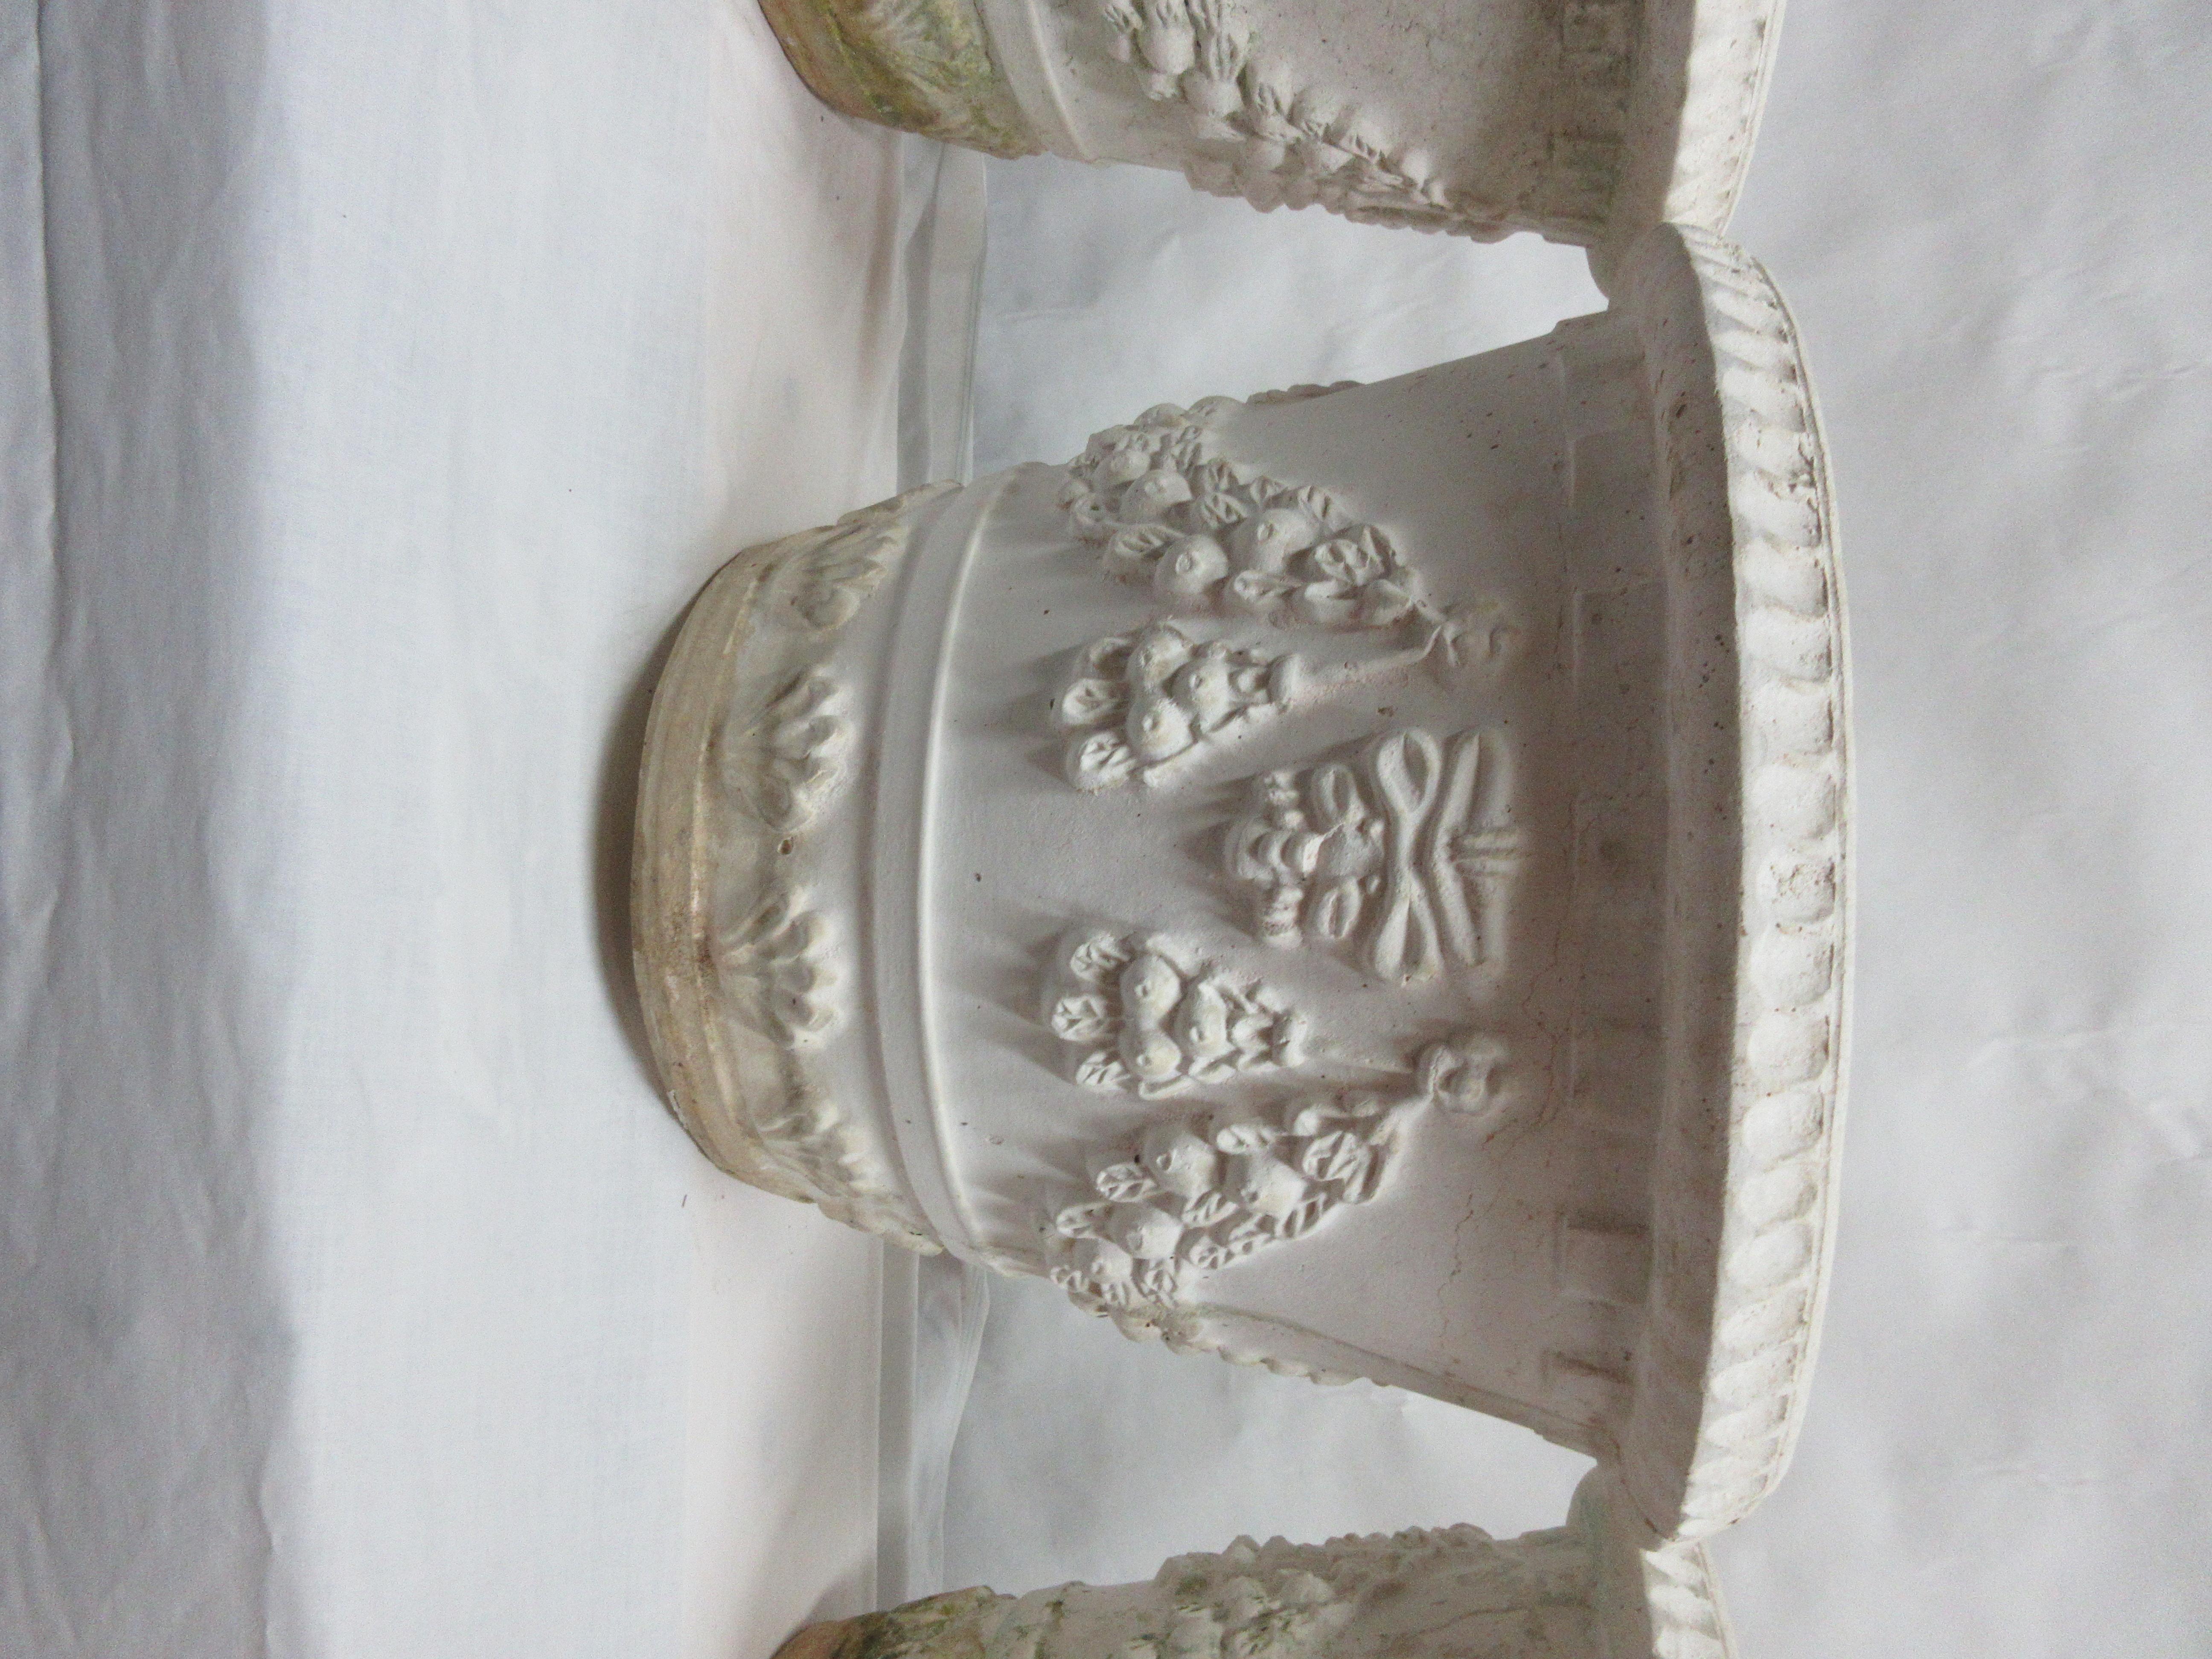 This is a set of 4 Ornate Italian Planters made by one of the TOP Garden Planter companies in Italy, Bitossi, they are in 100% Original condition.